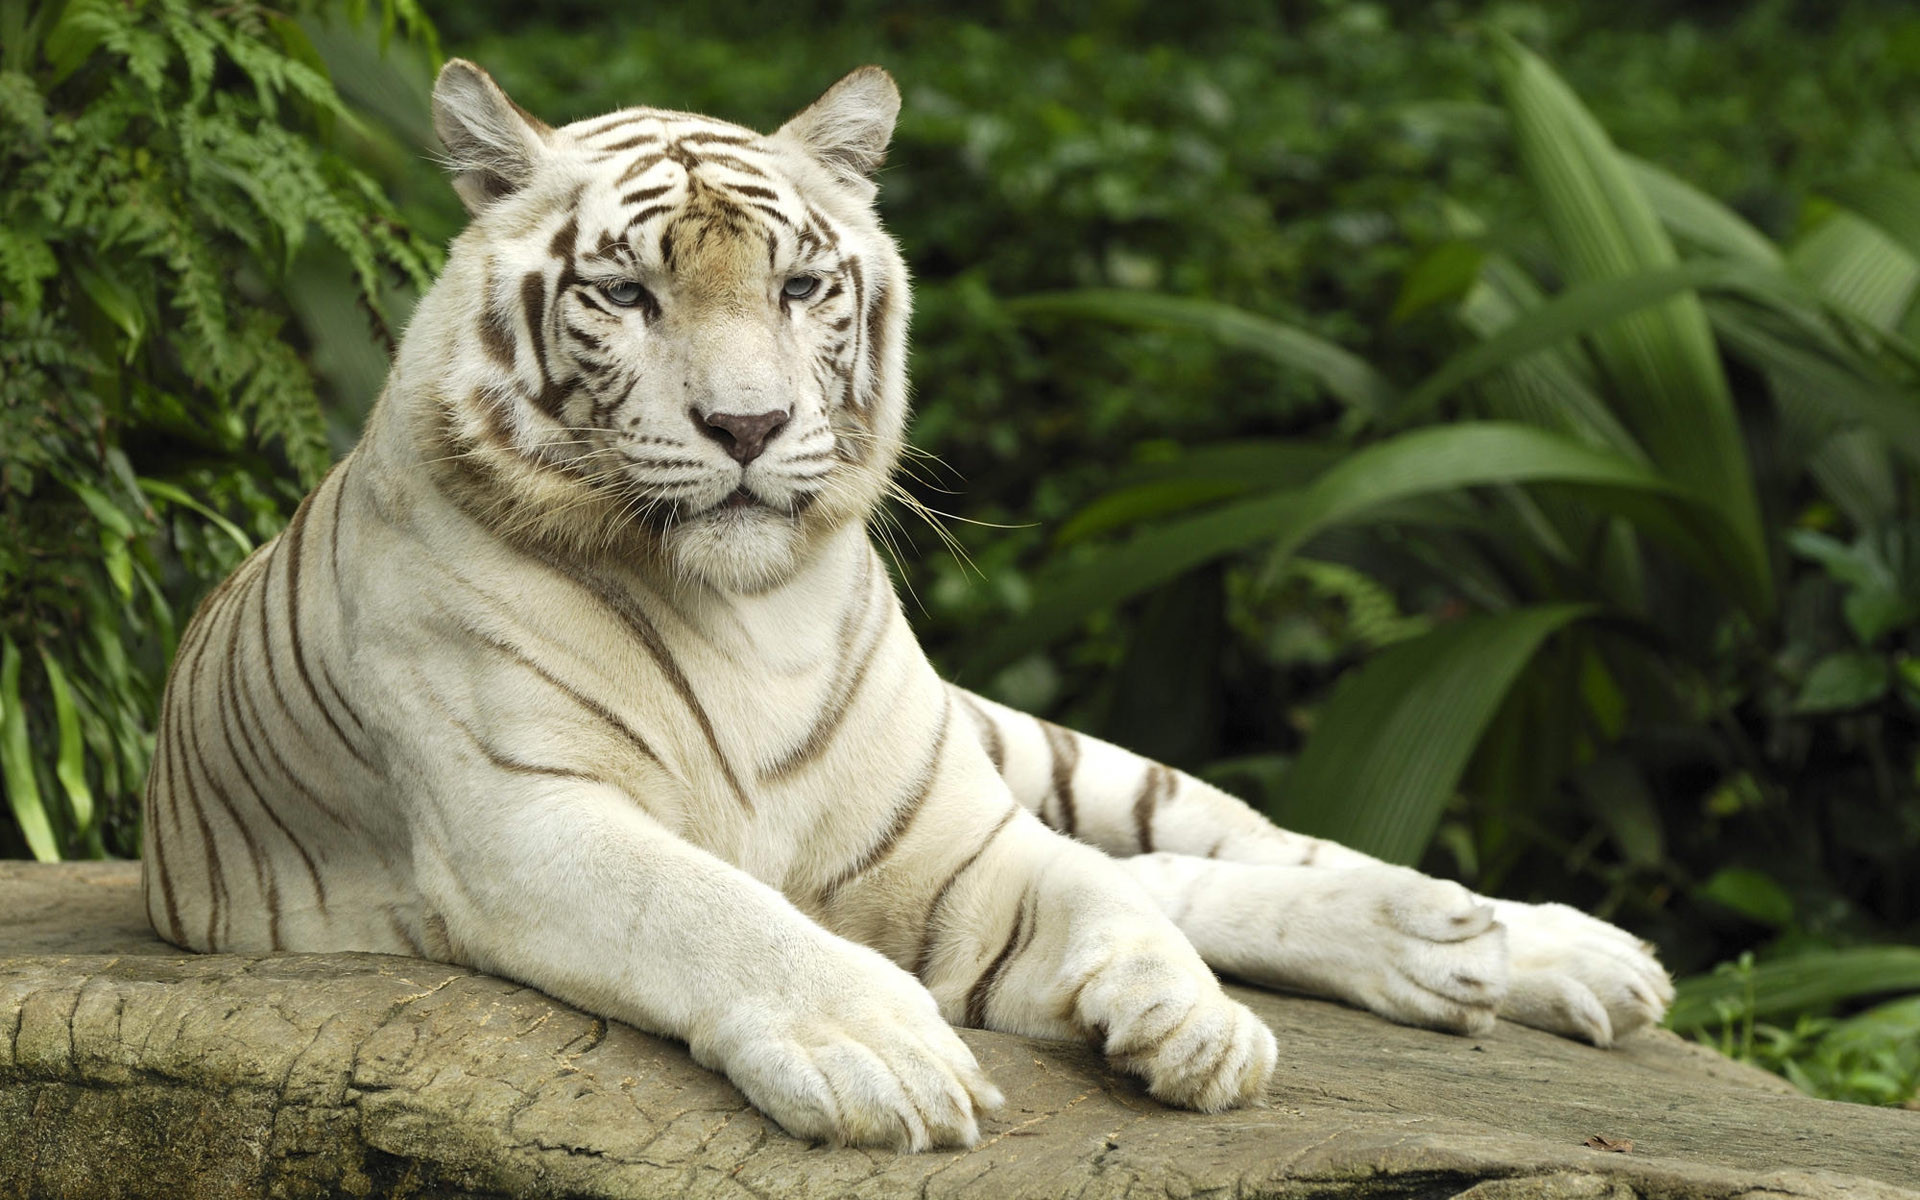 1920x1200 White Tiger Wallpaper Tigers Animals Wallpapers in jpg format for